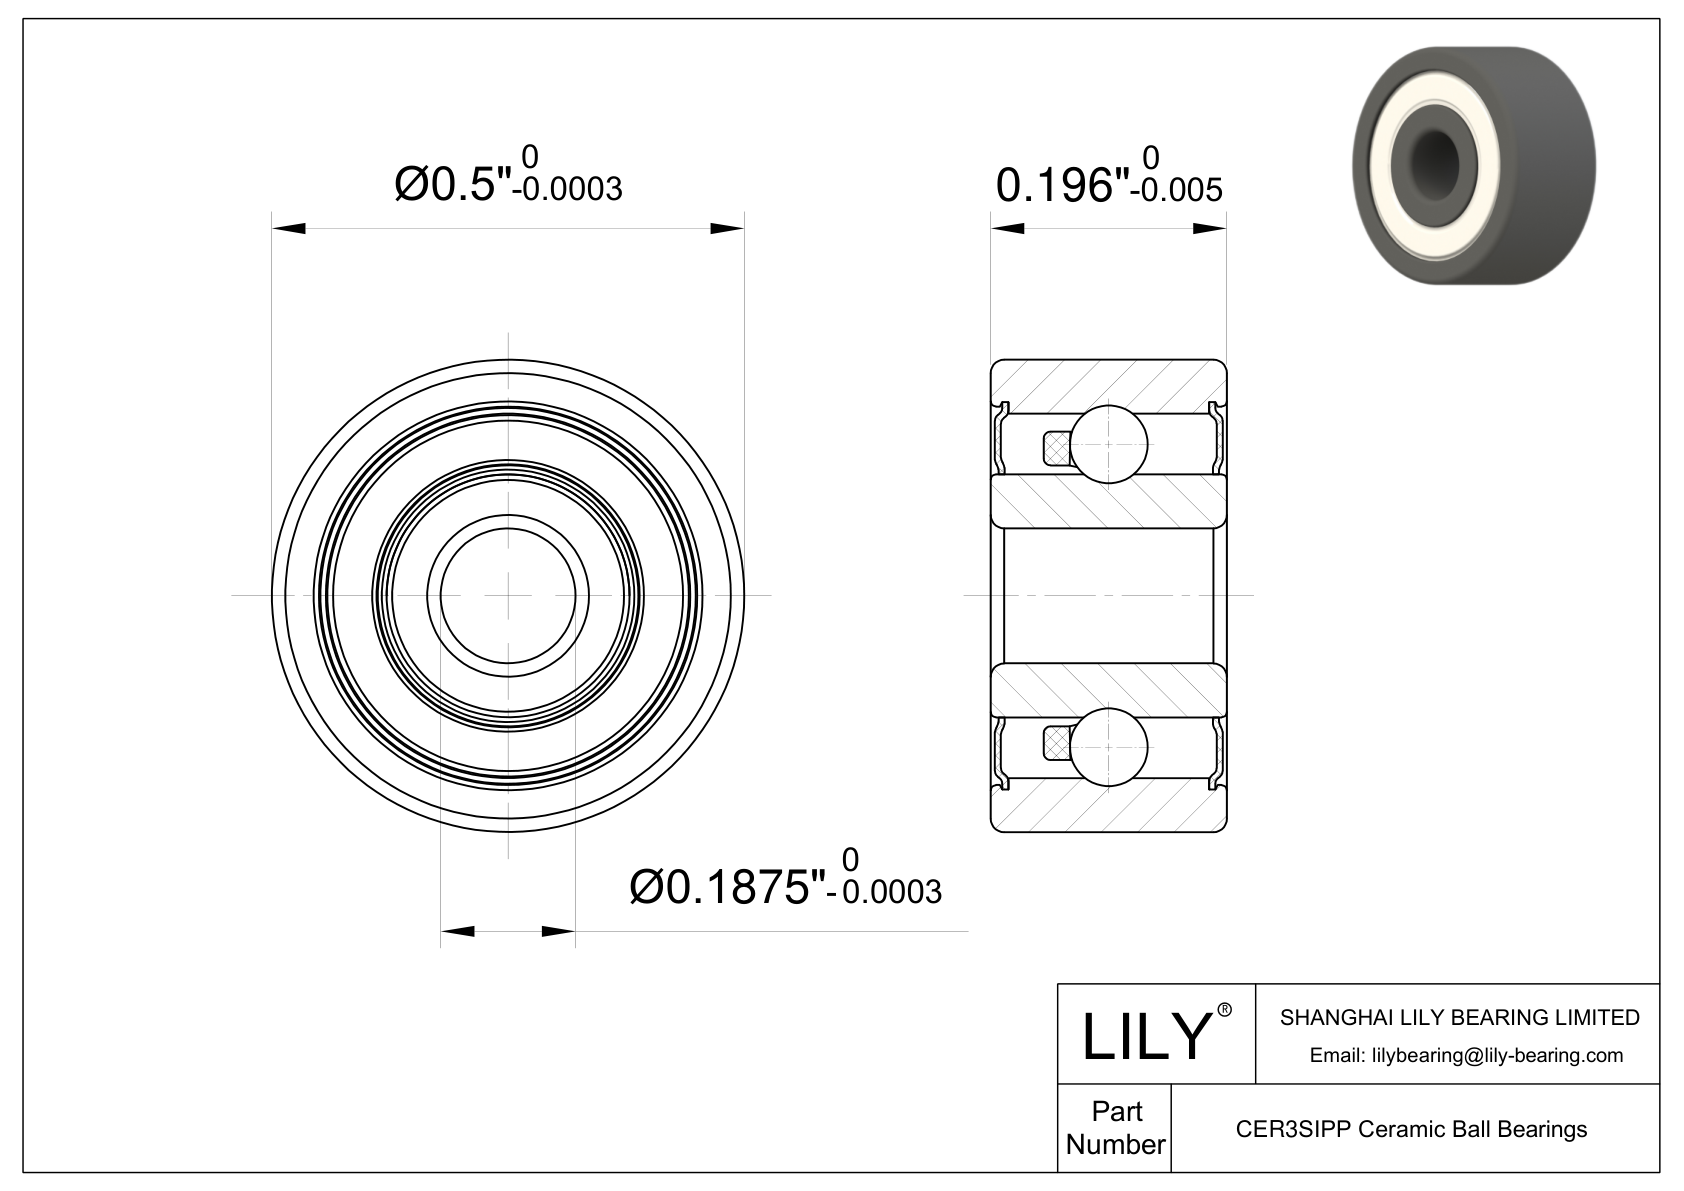 CESI R3 2RS Inch Size Silicon Nitride Ceramic Bearings cad drawing